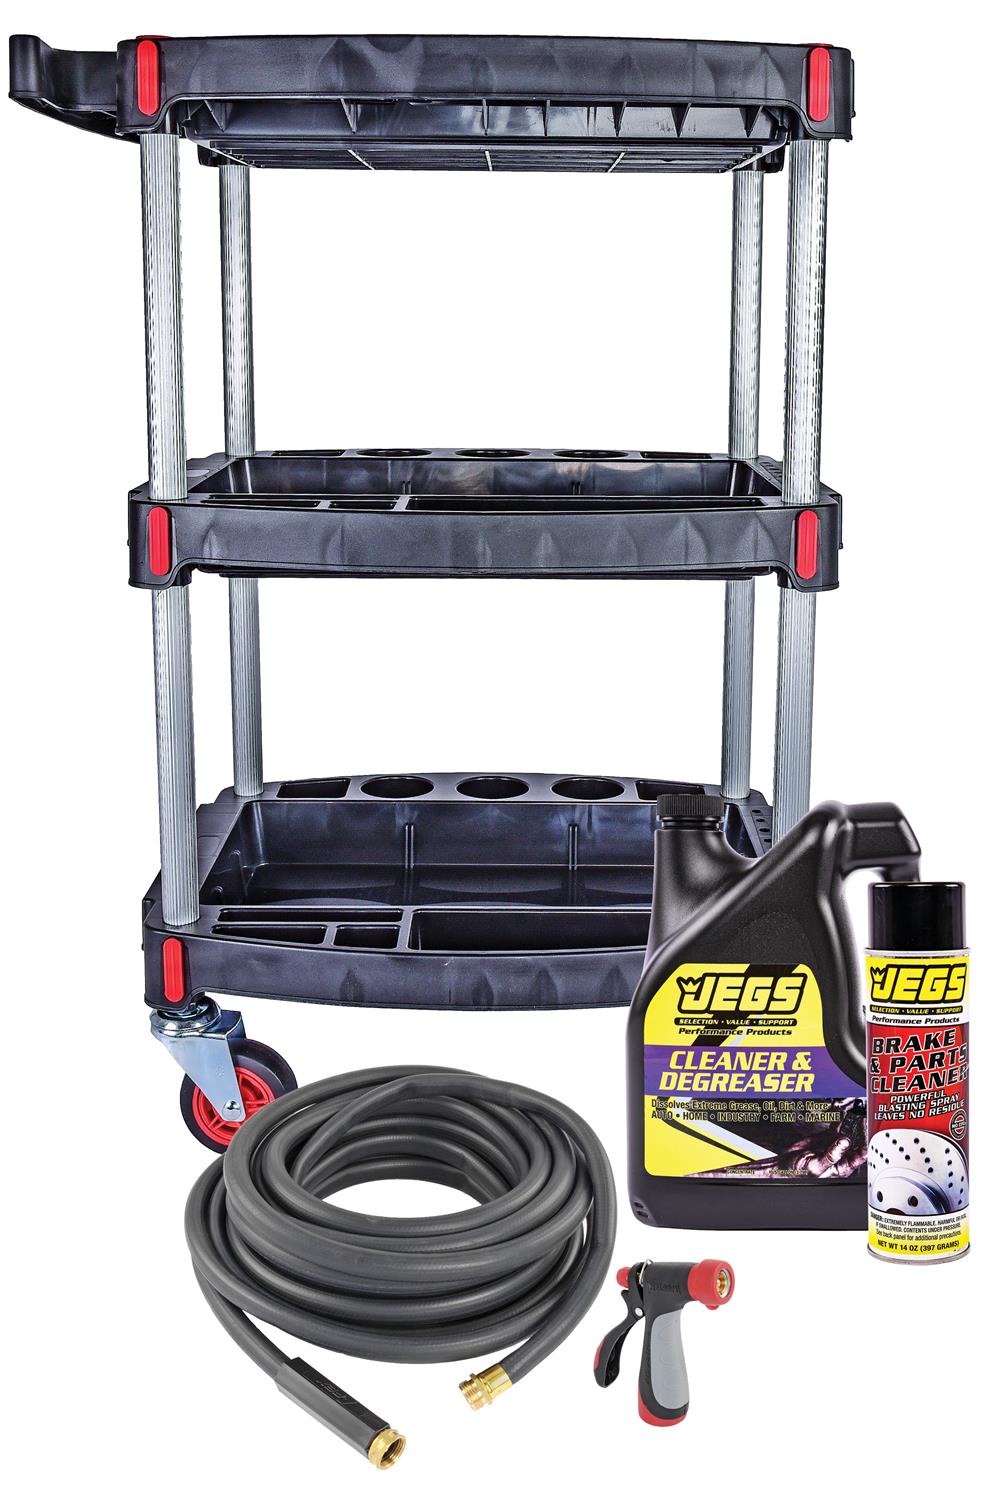 JEGS 72320: Wheel Cleaner, Tire Cleaner, Rim Cleaner - JEGS